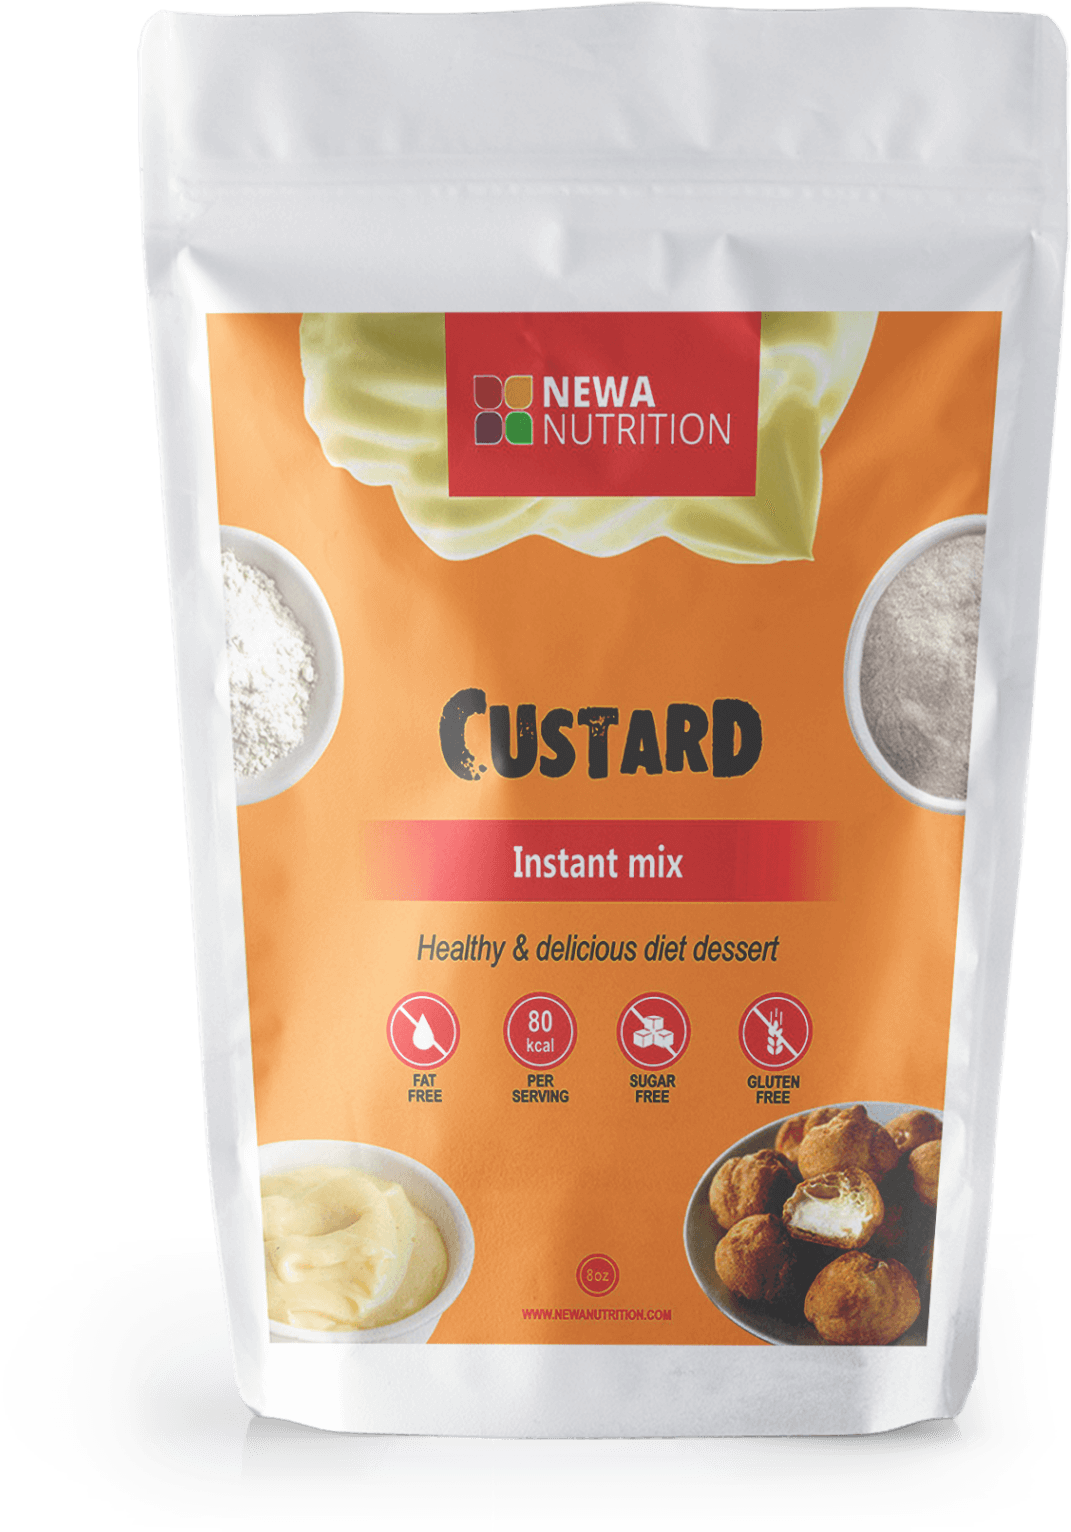 Newa Nutrition Custard Instant Mix Package PNG